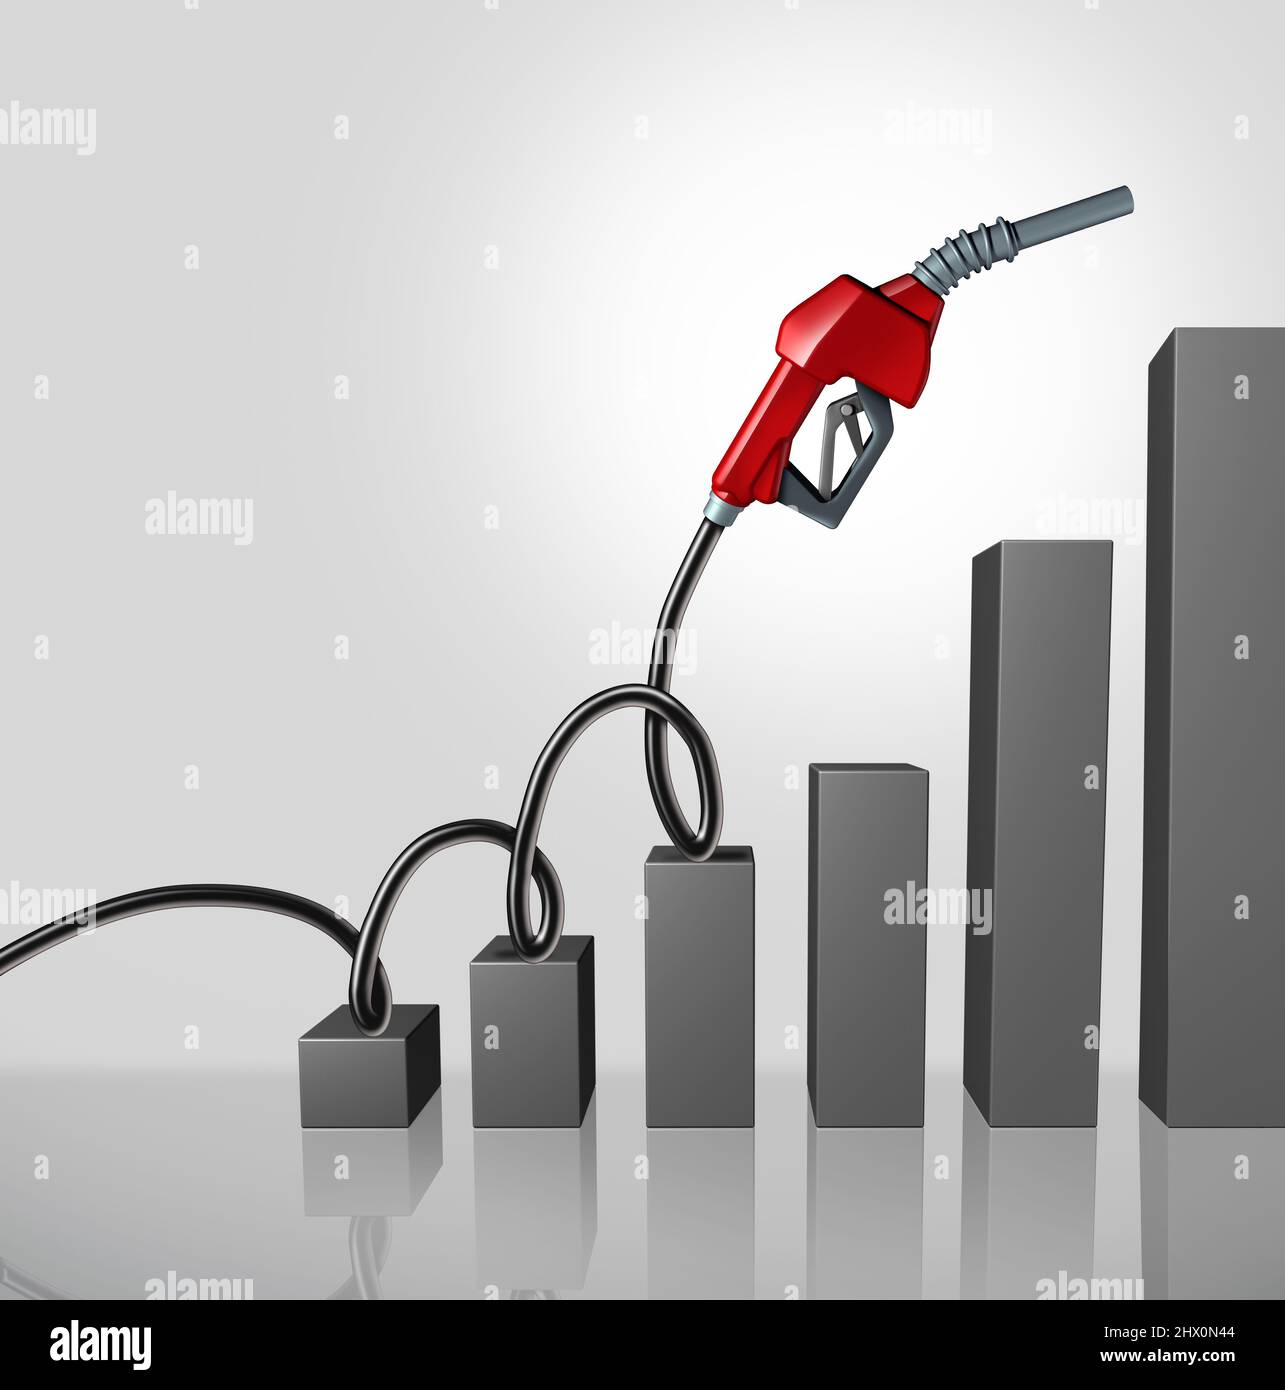 Rising gas prices and Oil increase fuel concept as fuel pump or climbing crude petroleum fossil energy due to market demand and supply shortages as Stock Photo